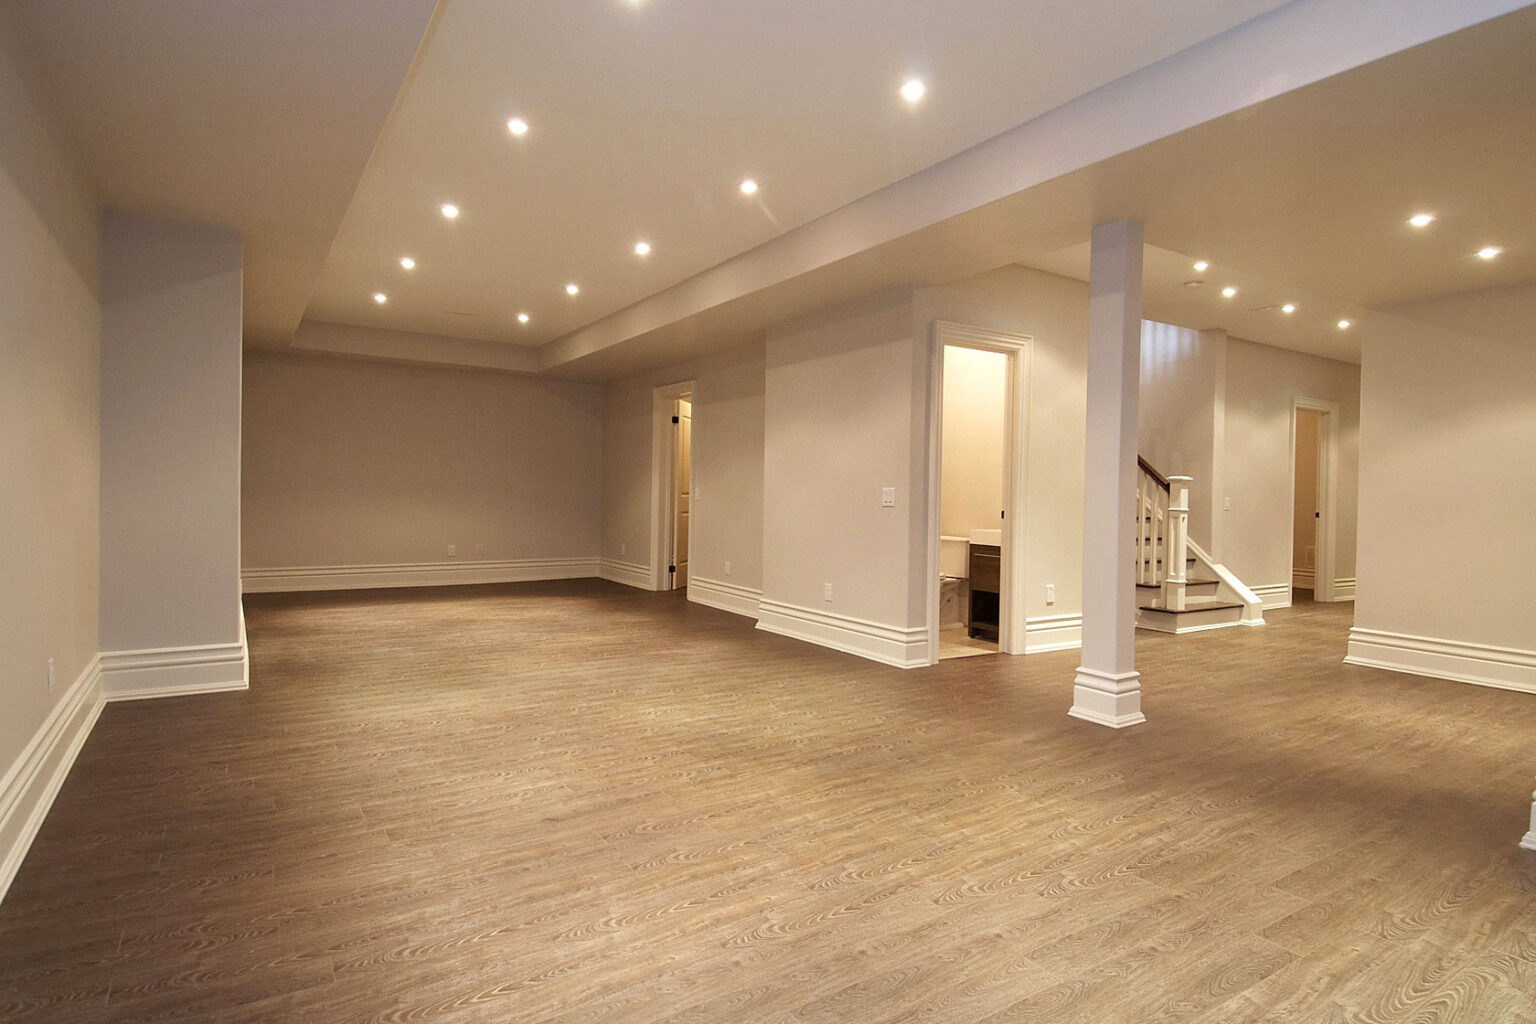 One of the biggest questions when considering home improvement is: is finishing a basement worth it? Here's everything you need to know.